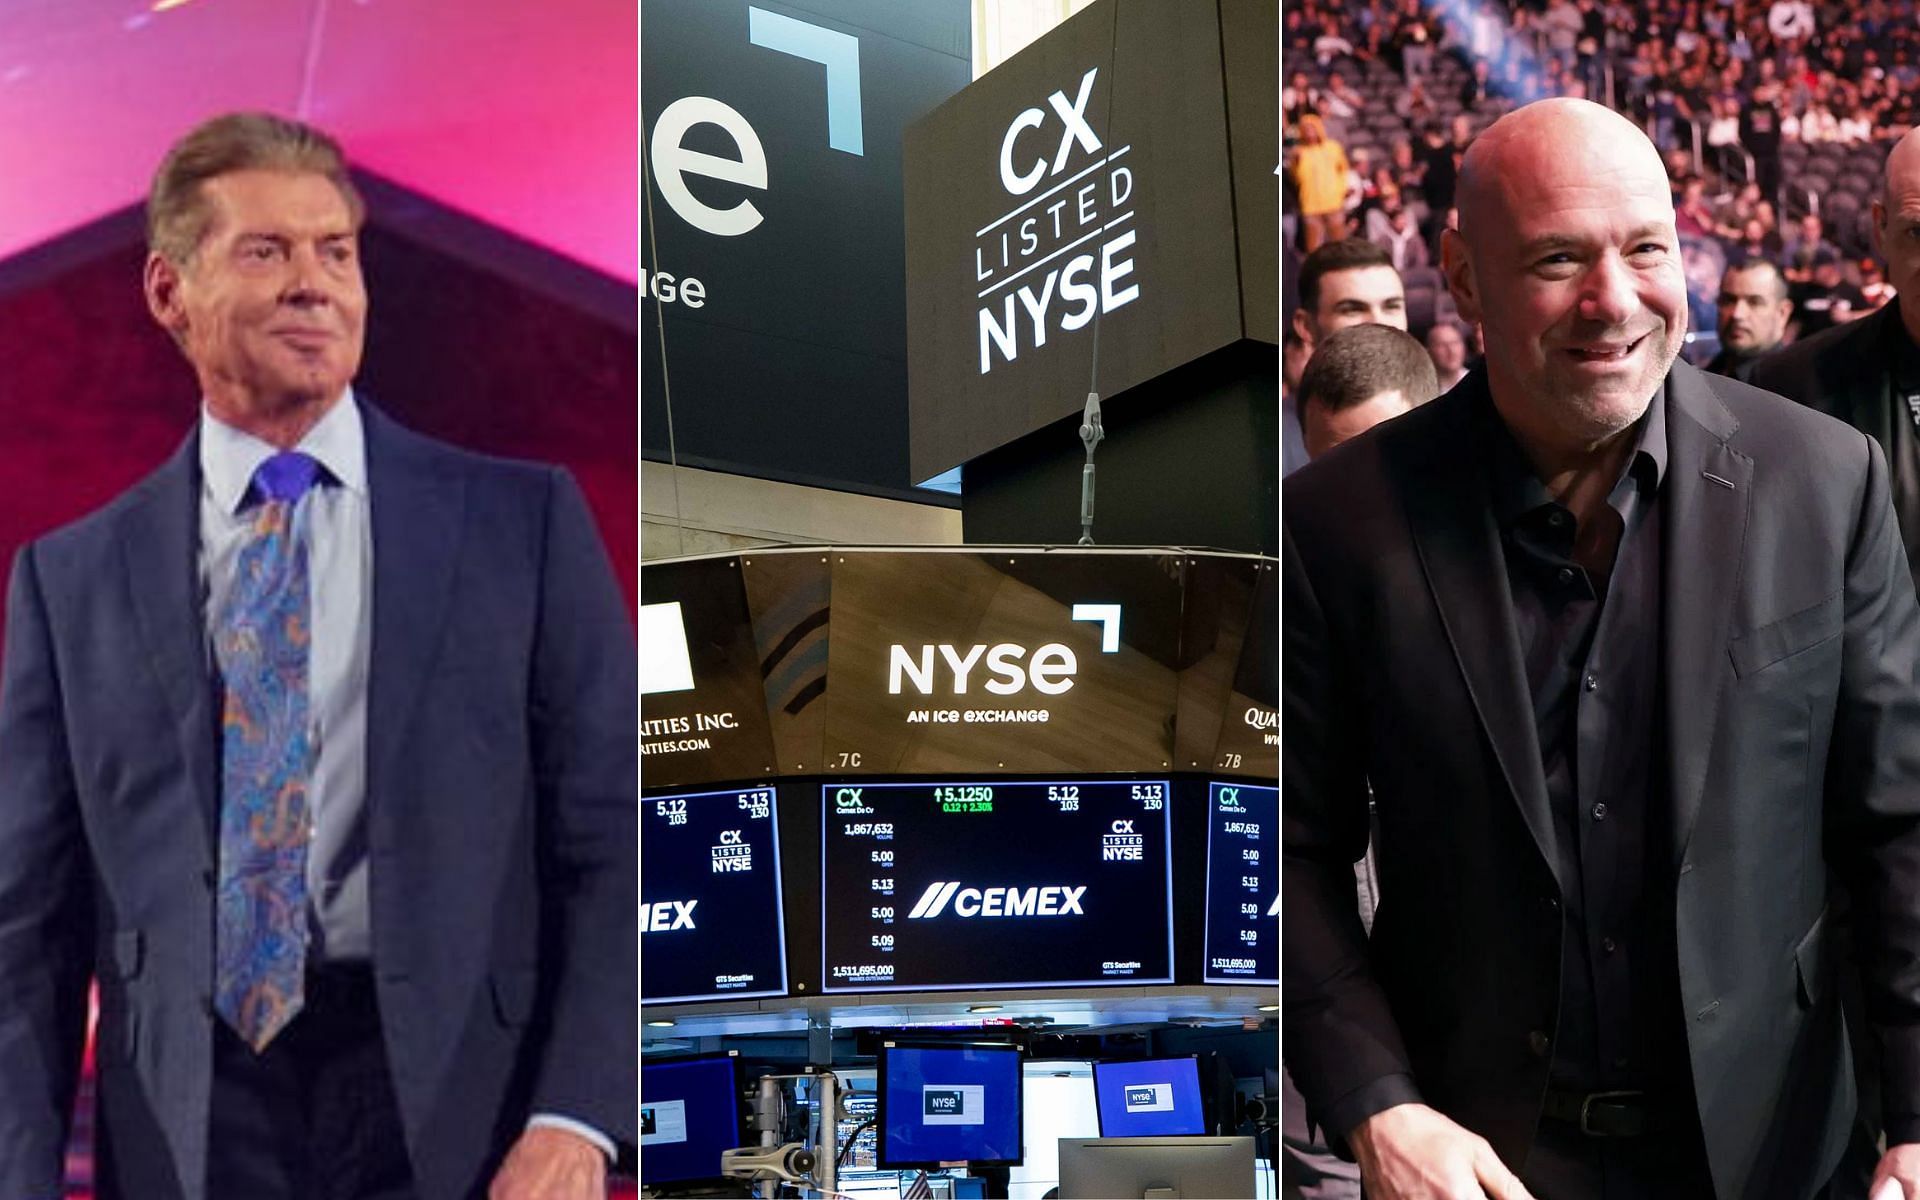 Vince McMahon [Left], NYSE [Middle], and Dana White [Photo credit: wwe.com, and @CEMEX - Twitter]